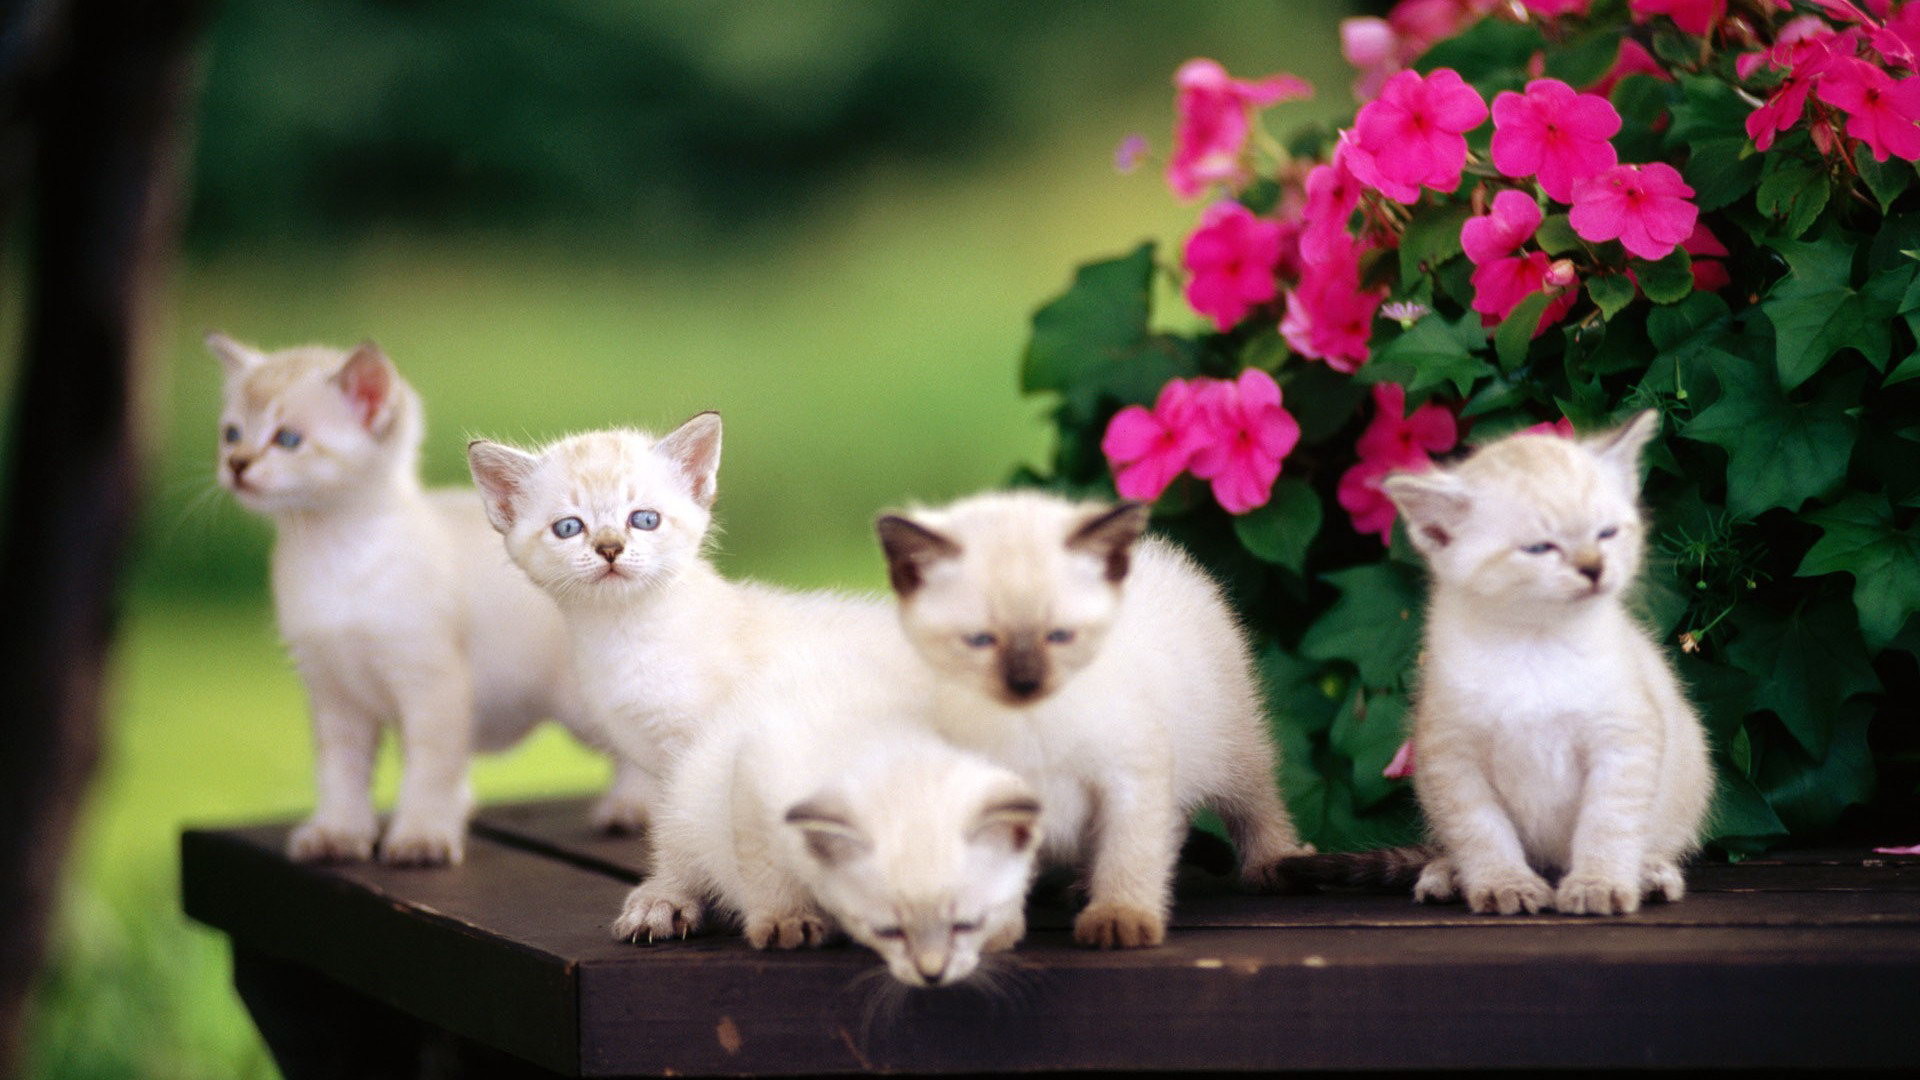 1920x1080 Cute baby cat and flower wallpapers hd